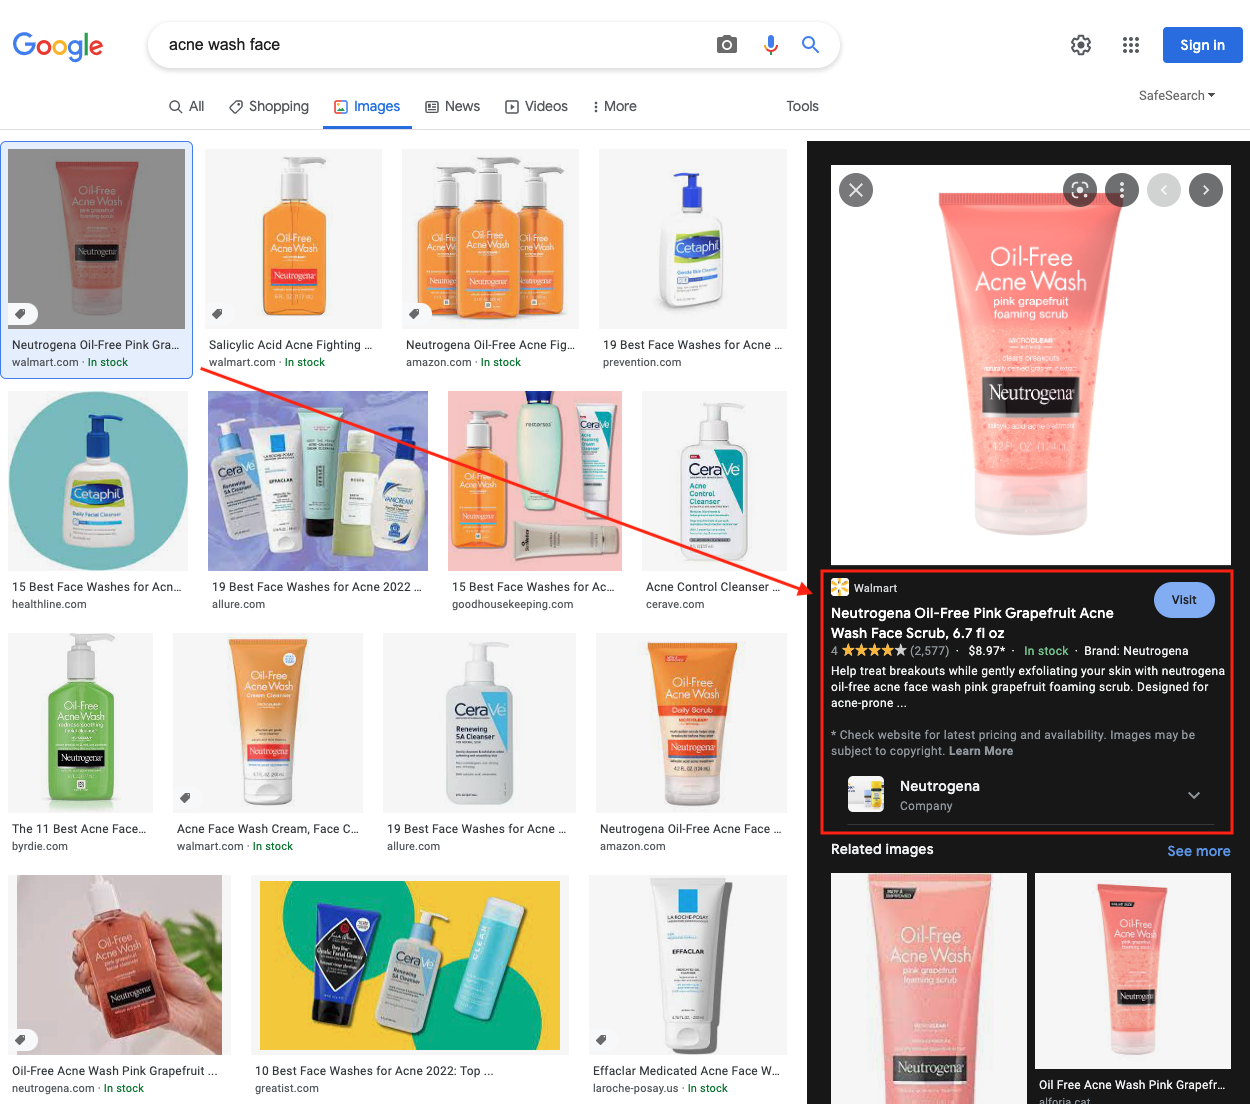 Product images with links to sellers in image search